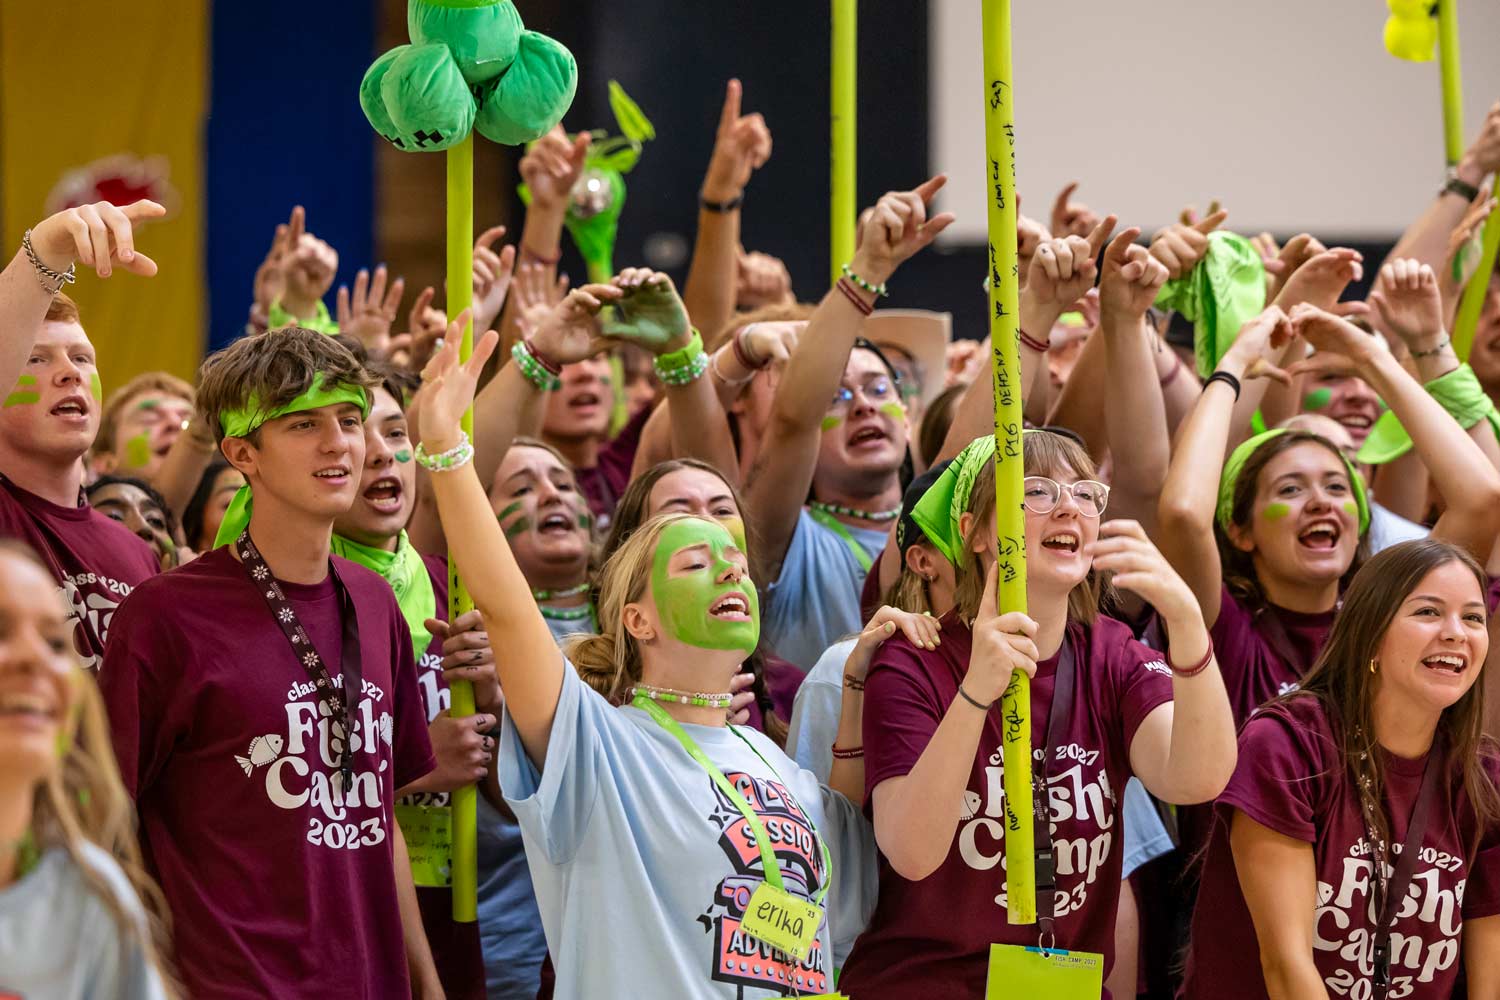 Freshman engaging in a "yell off" at Fish Camp.